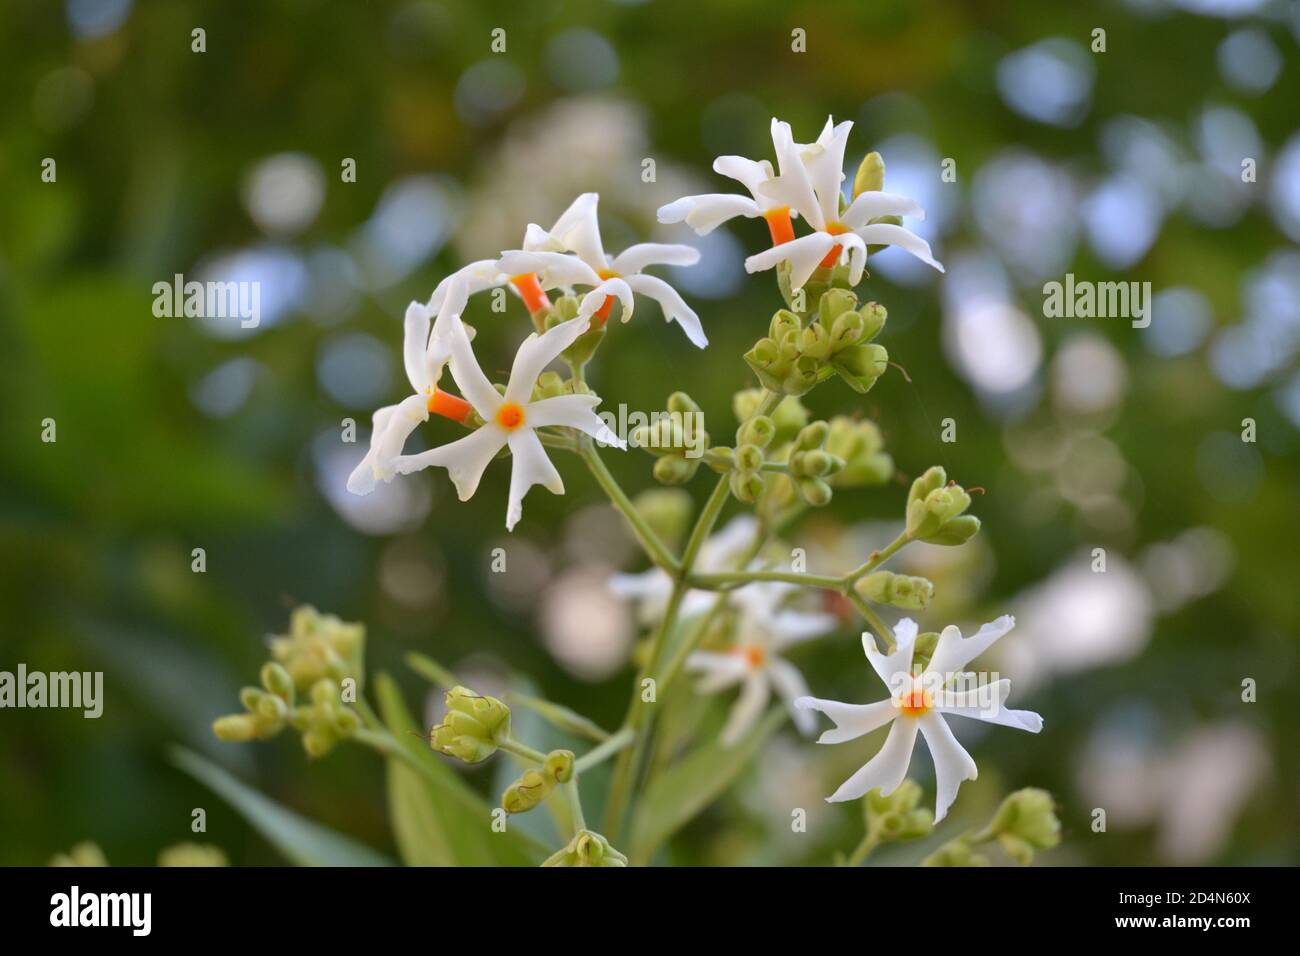 Nyctanthes Arbor Tristis High Resolution Stock Photography And Images Alamy